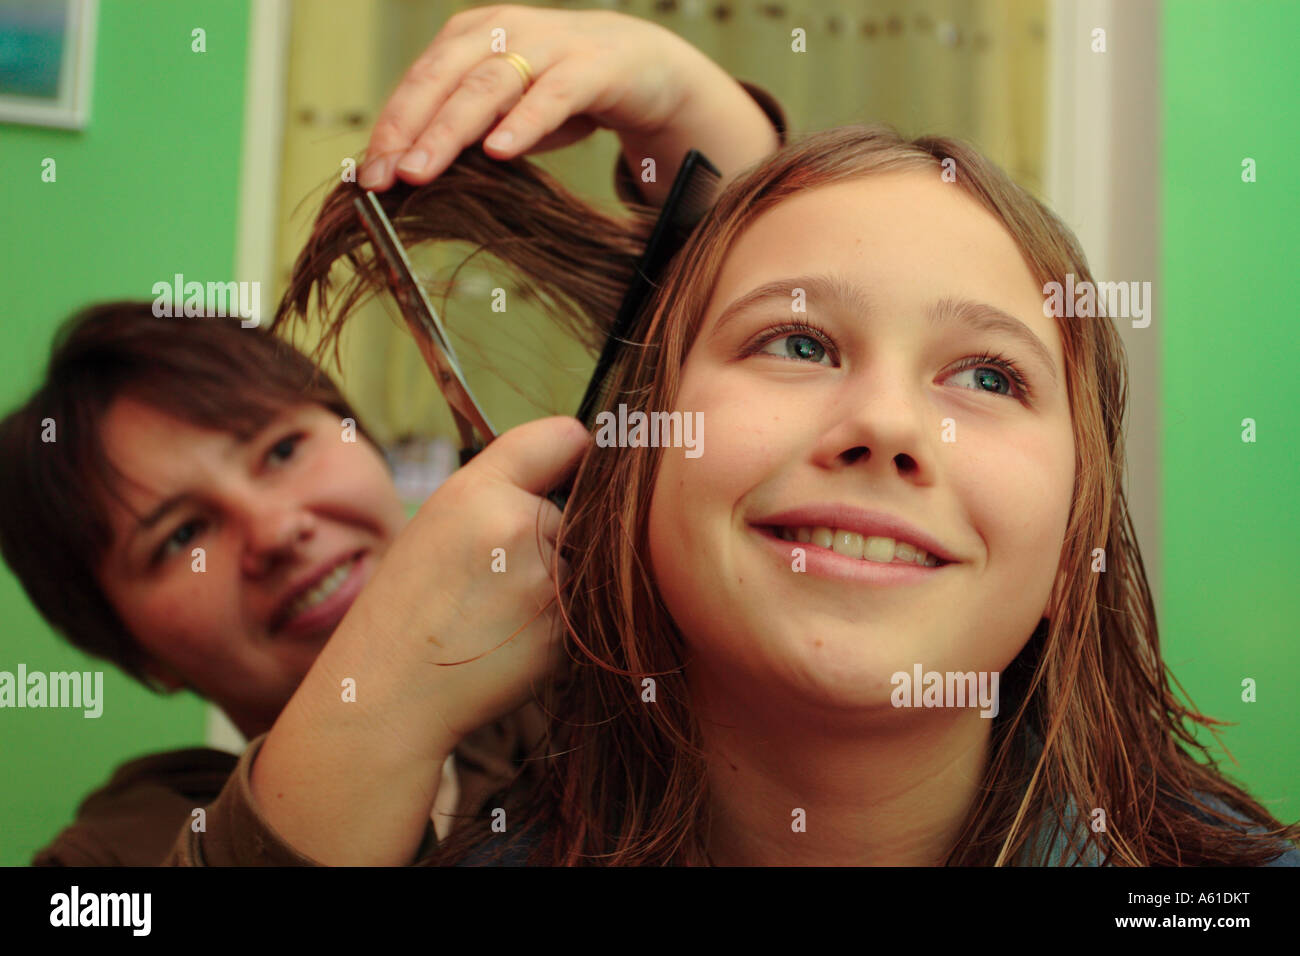 Young girl having her hair cut by her mother at home Stock Photo - Alamy